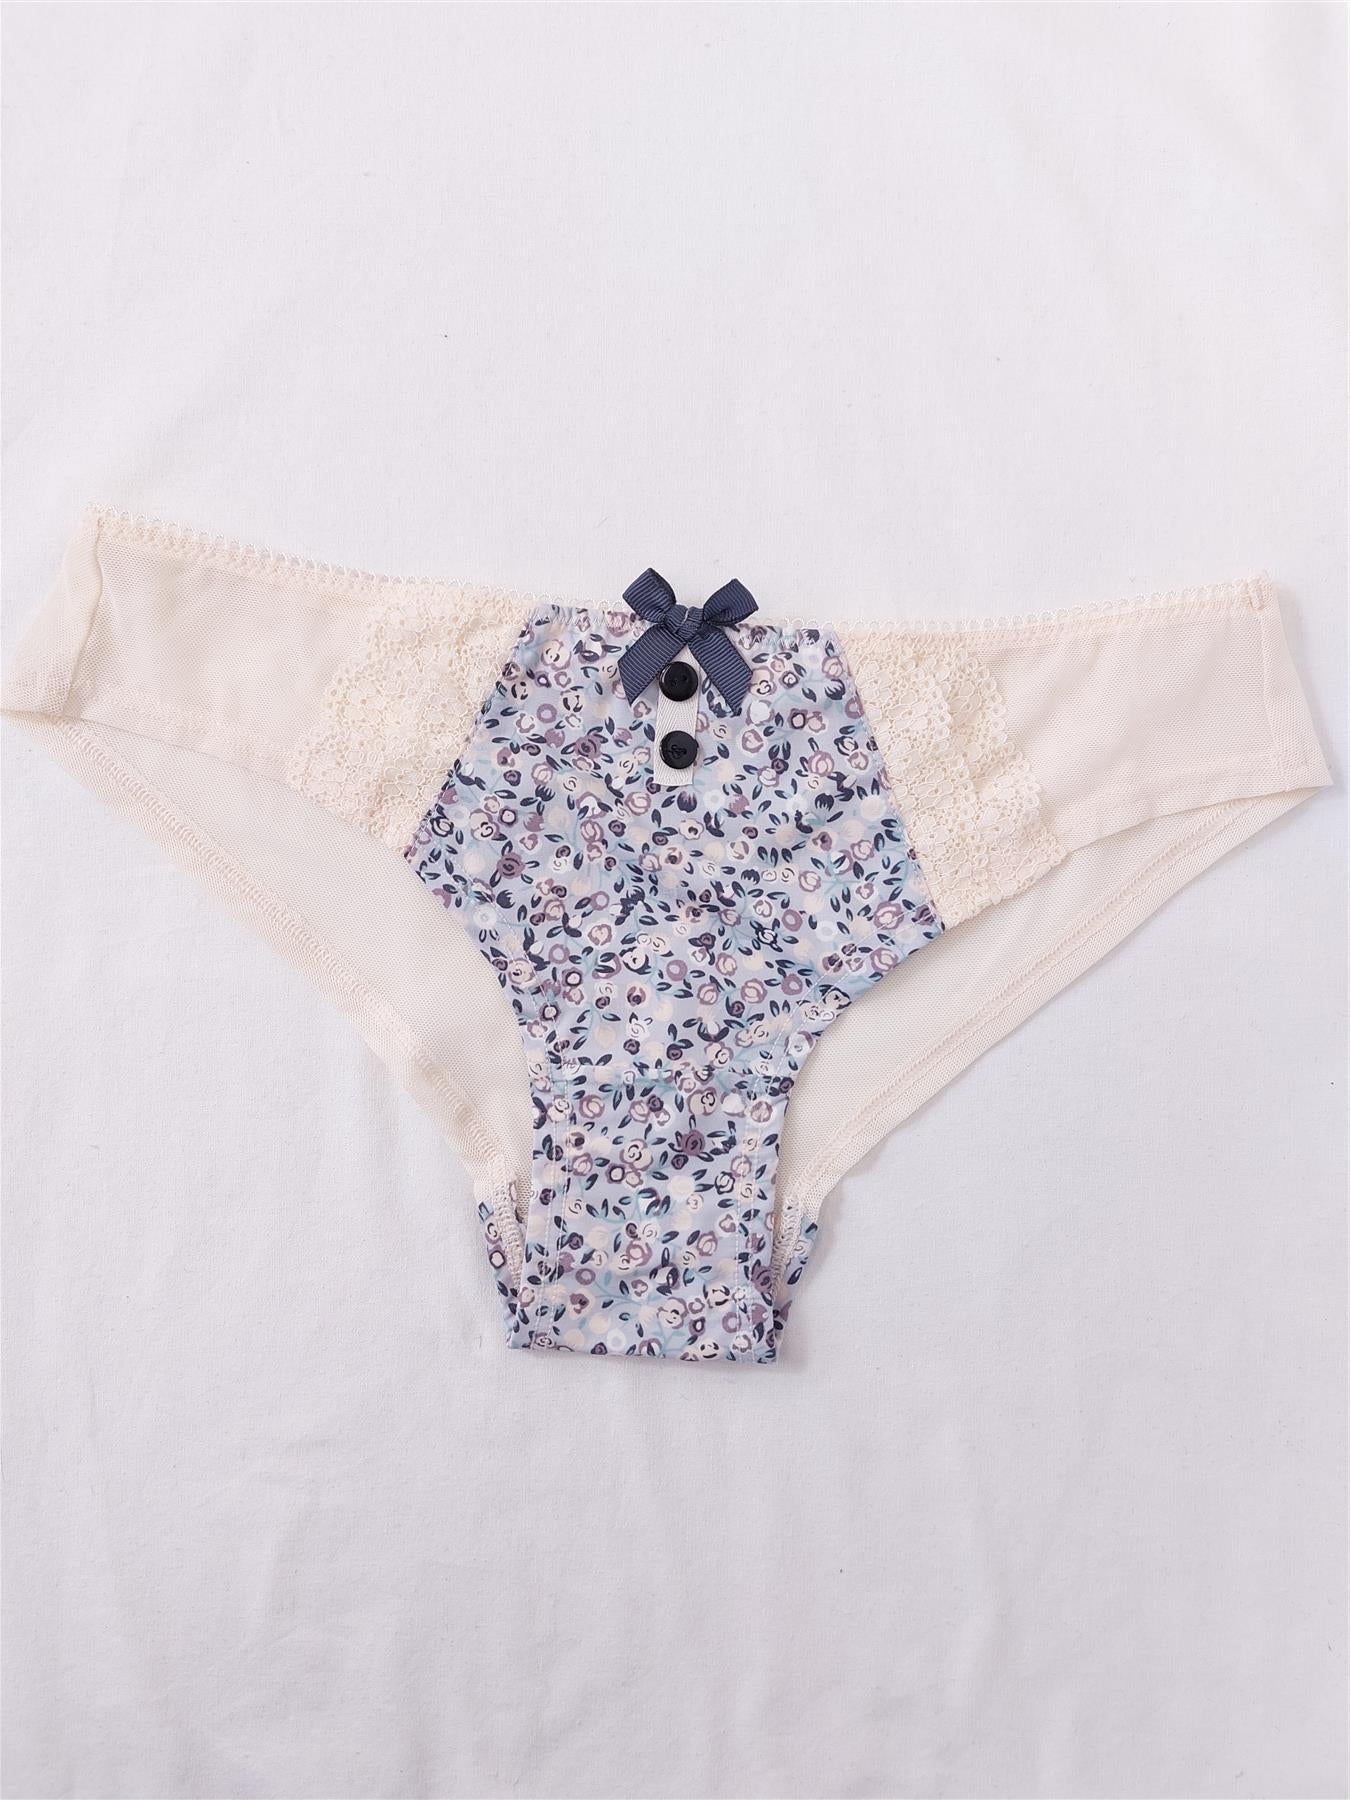 3x Iris & Lilly Bikini Brief Knickers Floral Bow and Button Detail